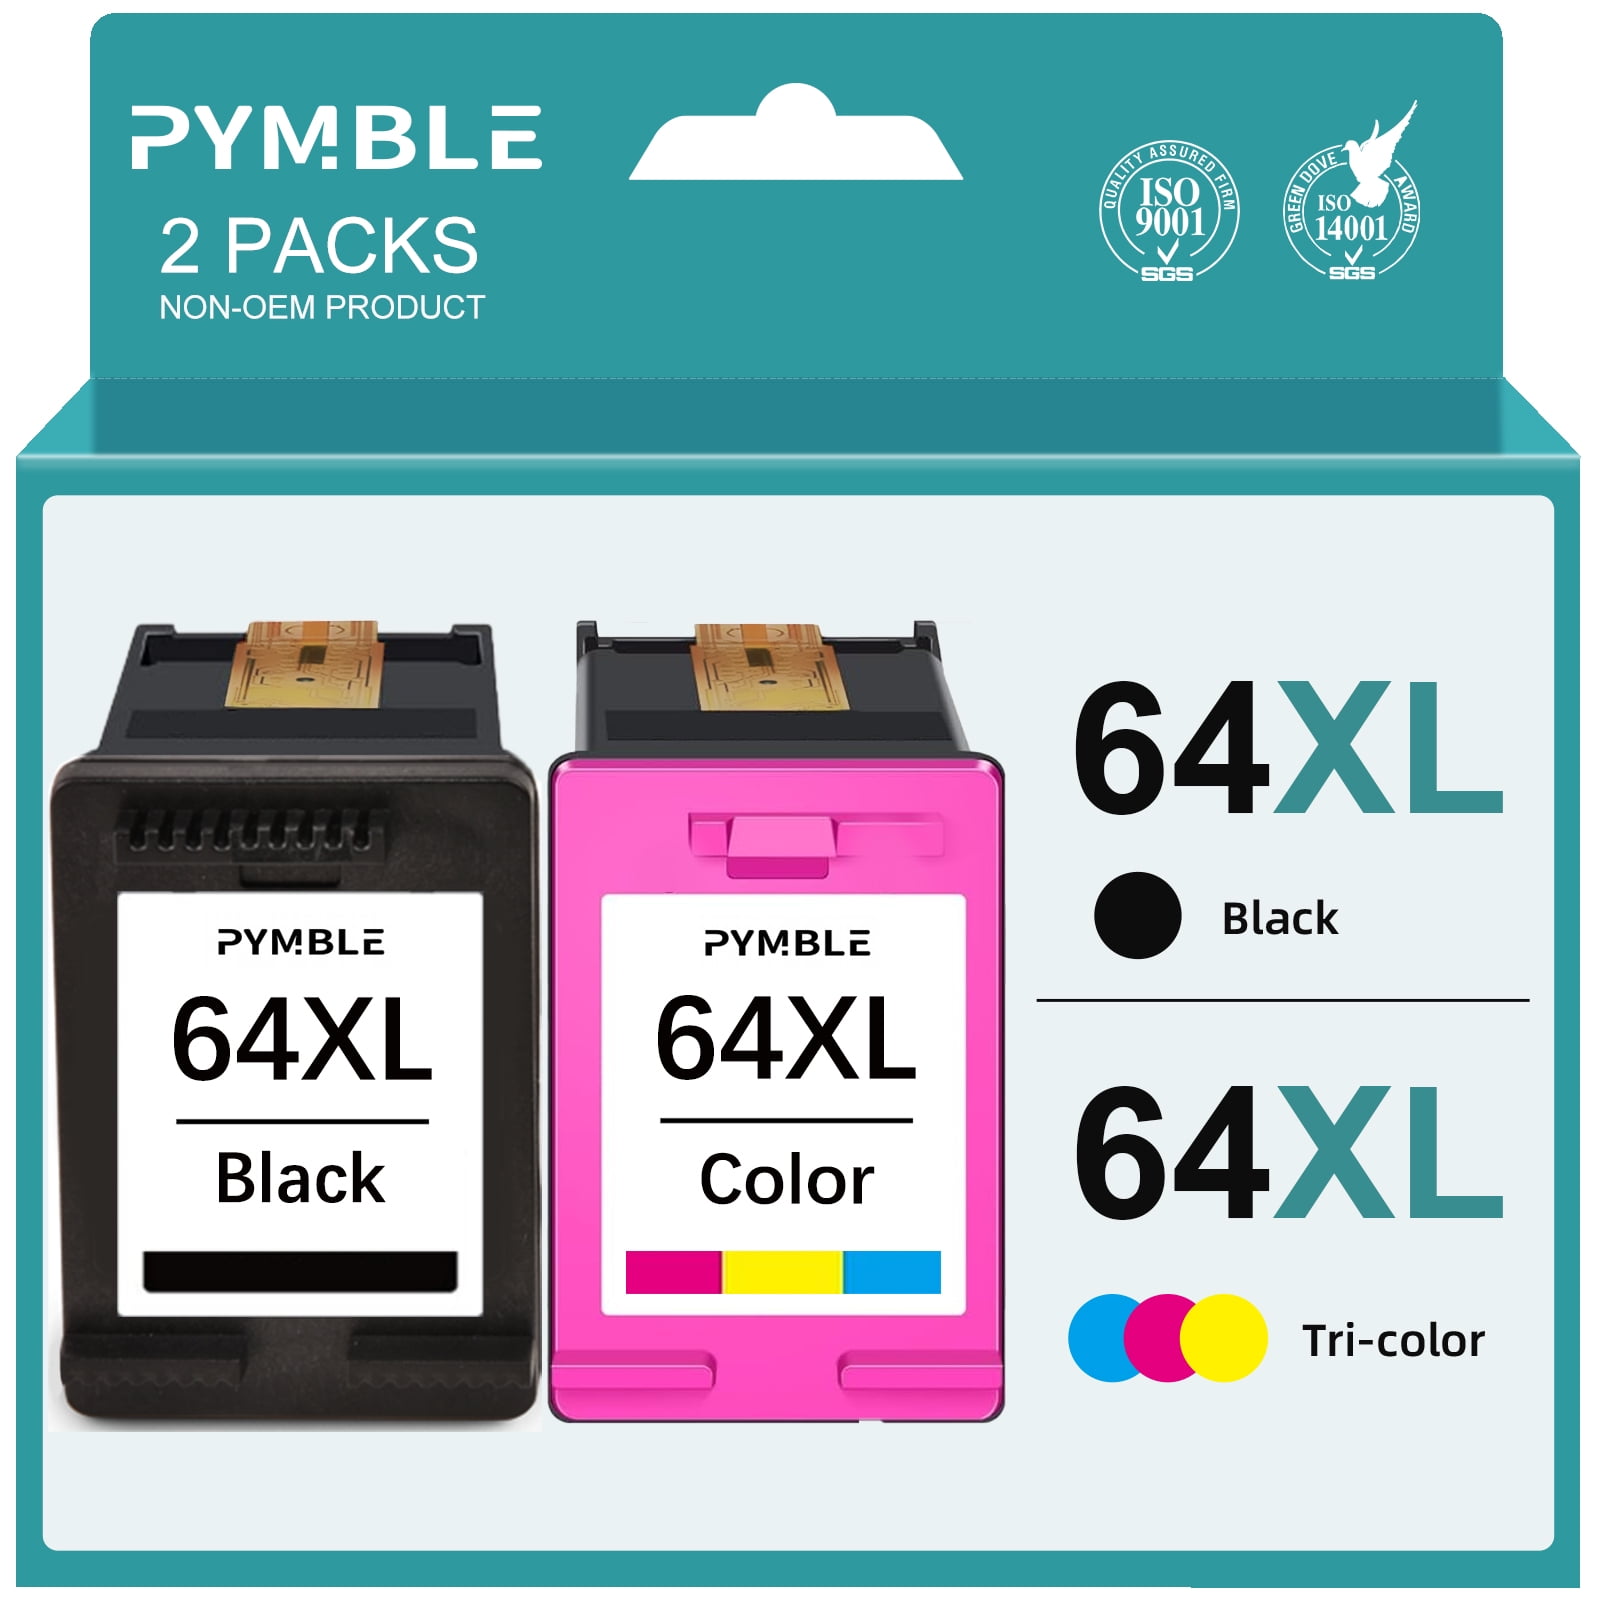 HP304 HP 304 Printer Ink Cartridge Review, by Rapid Resolutions